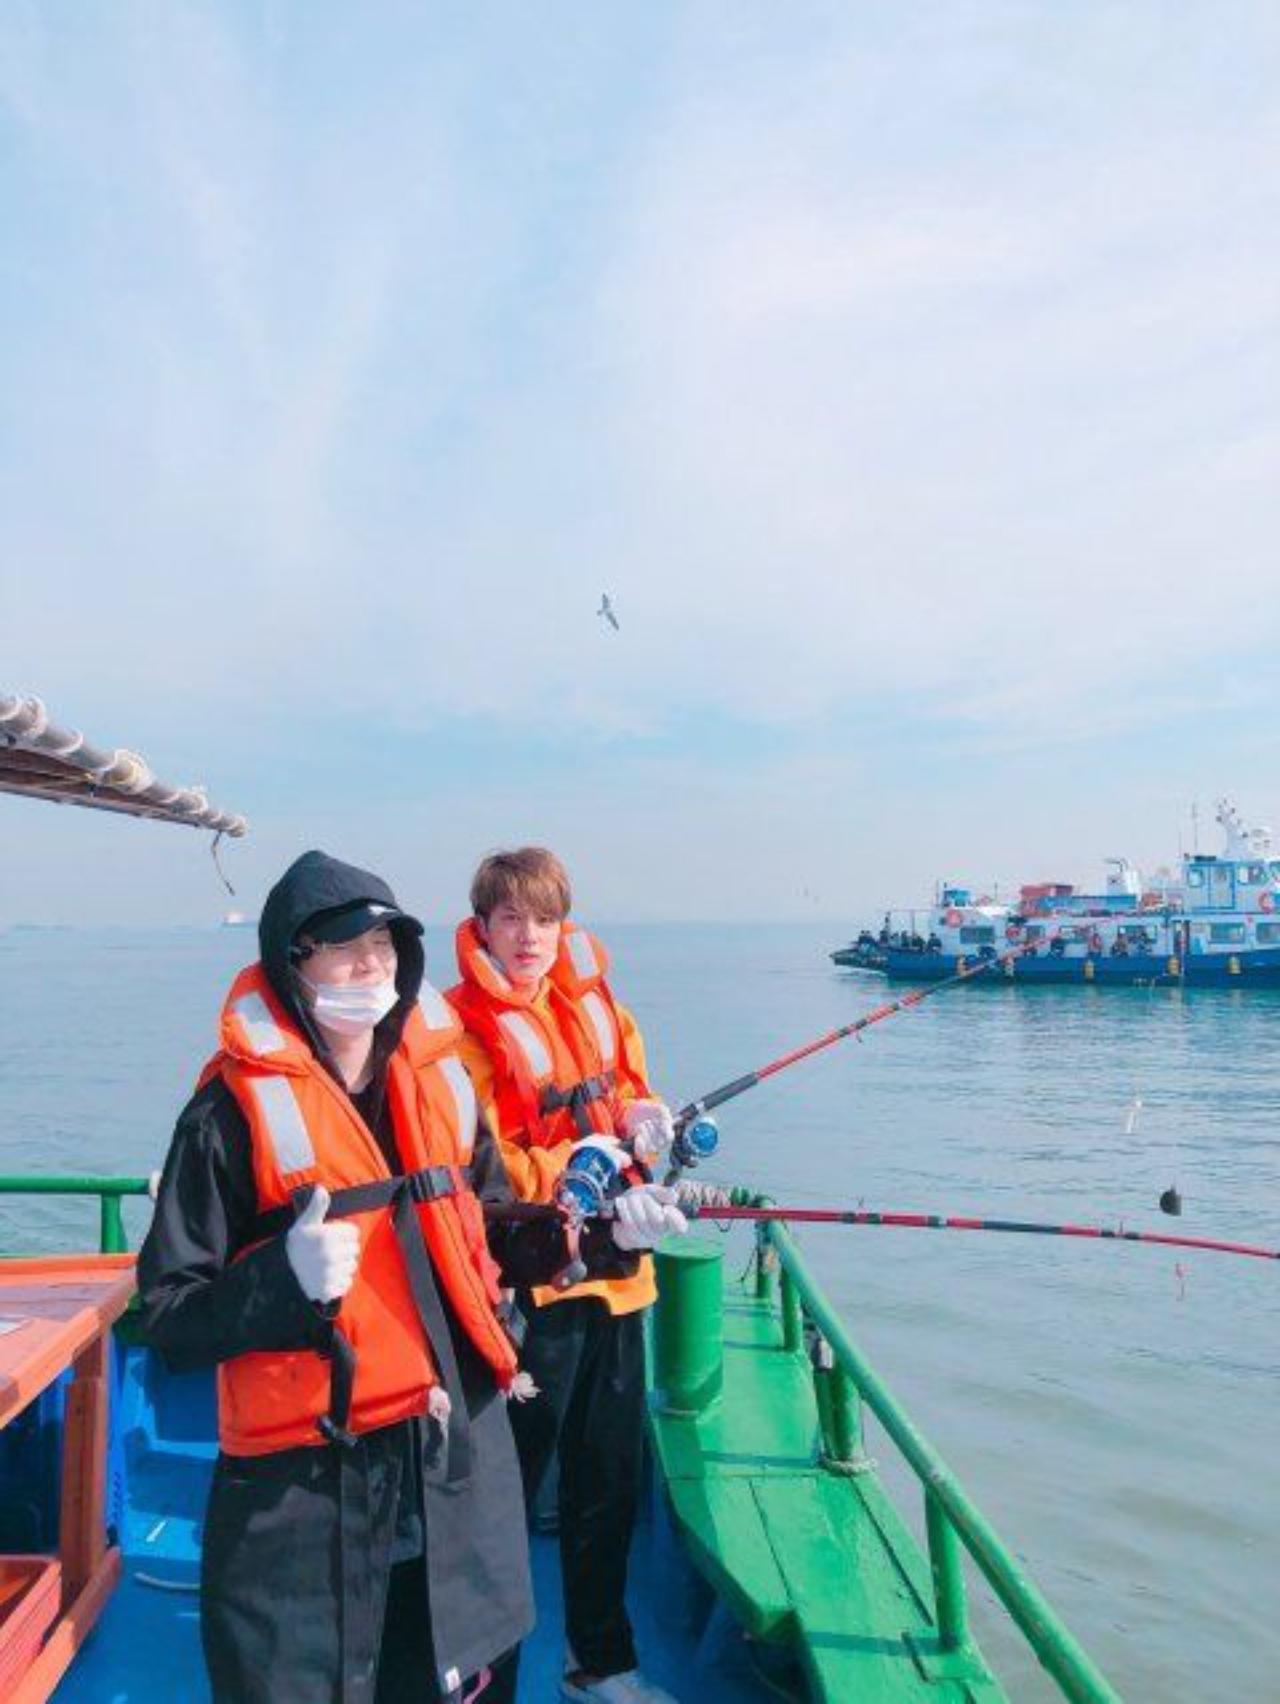 Jin loves fishing - and Suga tags along just to make him happy! Now can there be a more precious bond than that?